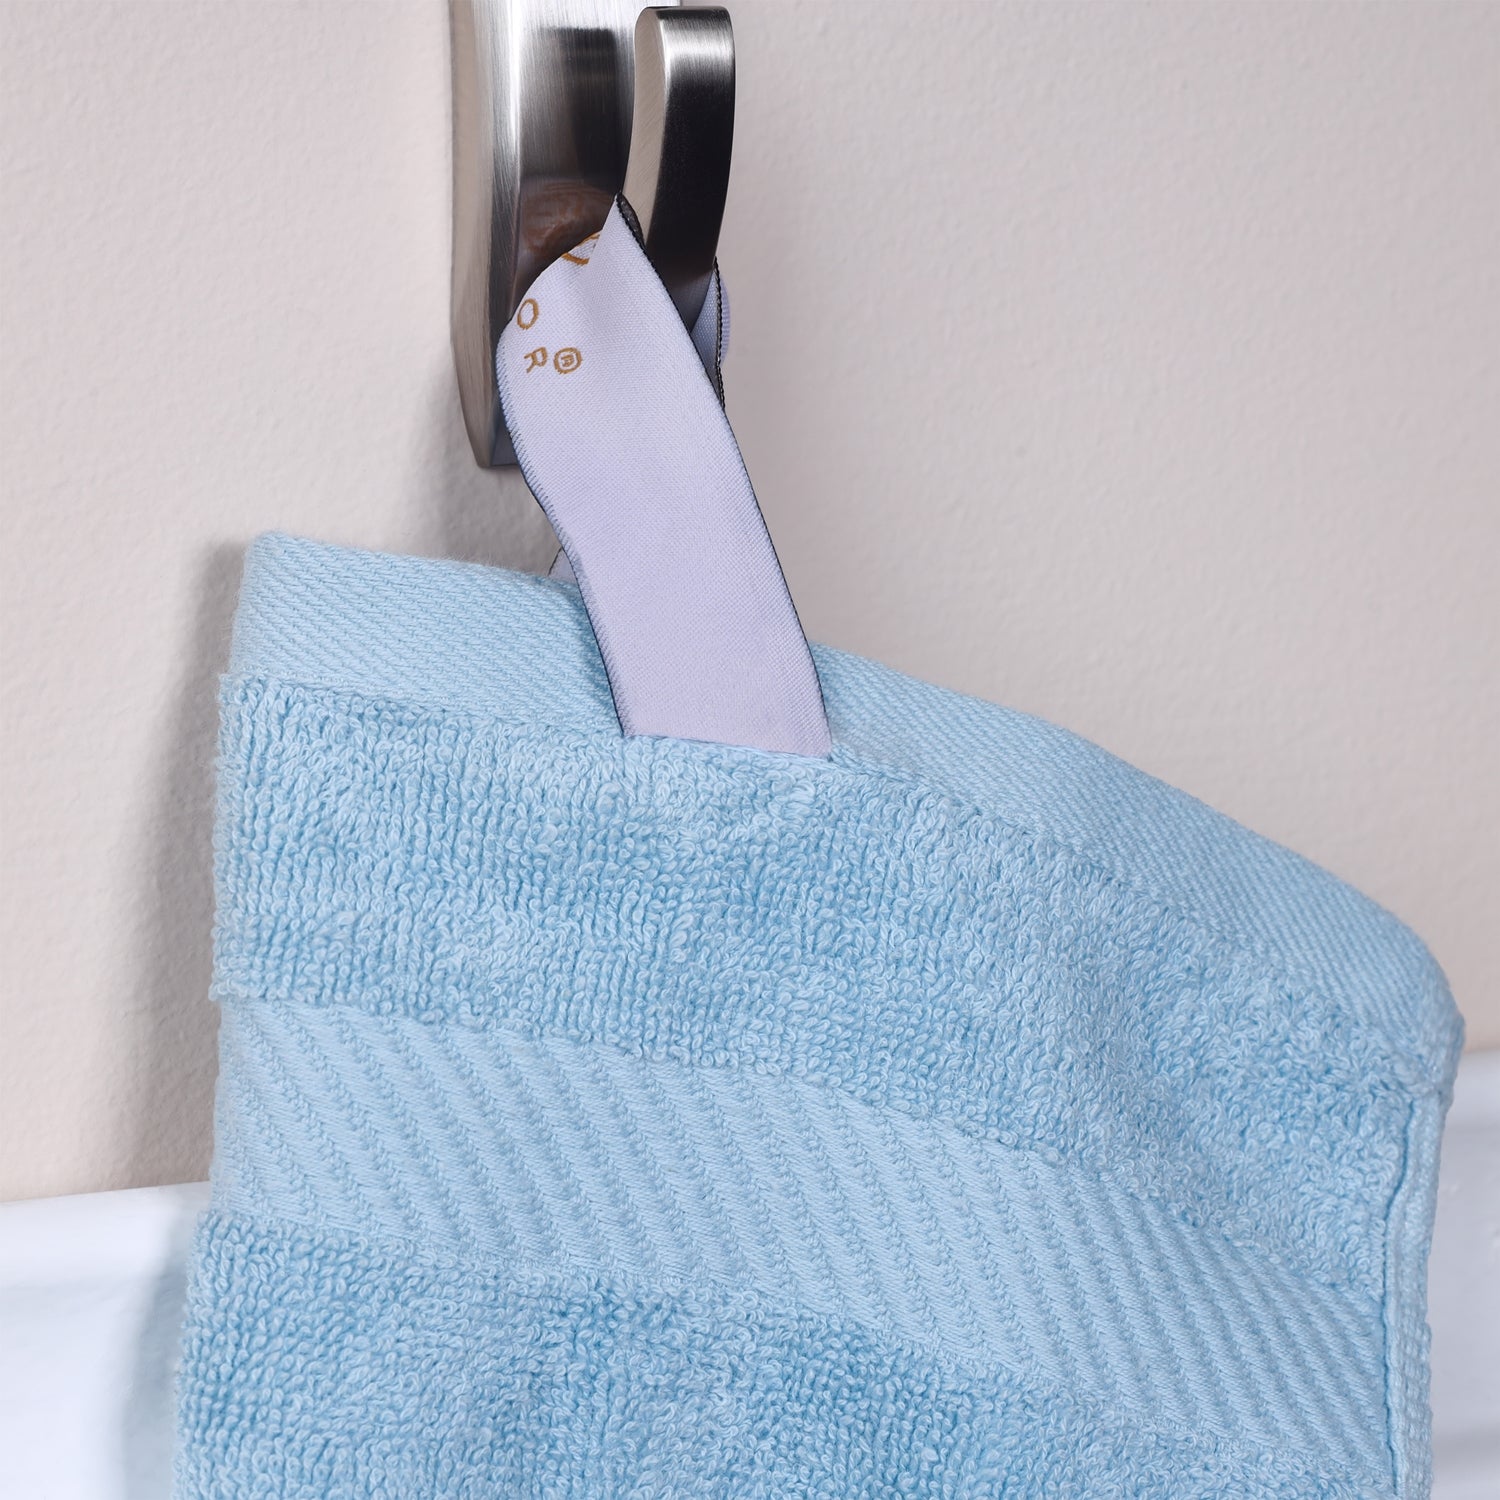 Kendell Egyptian Cotton Quick Drying 3-Piece Towel Set - Winter Blue